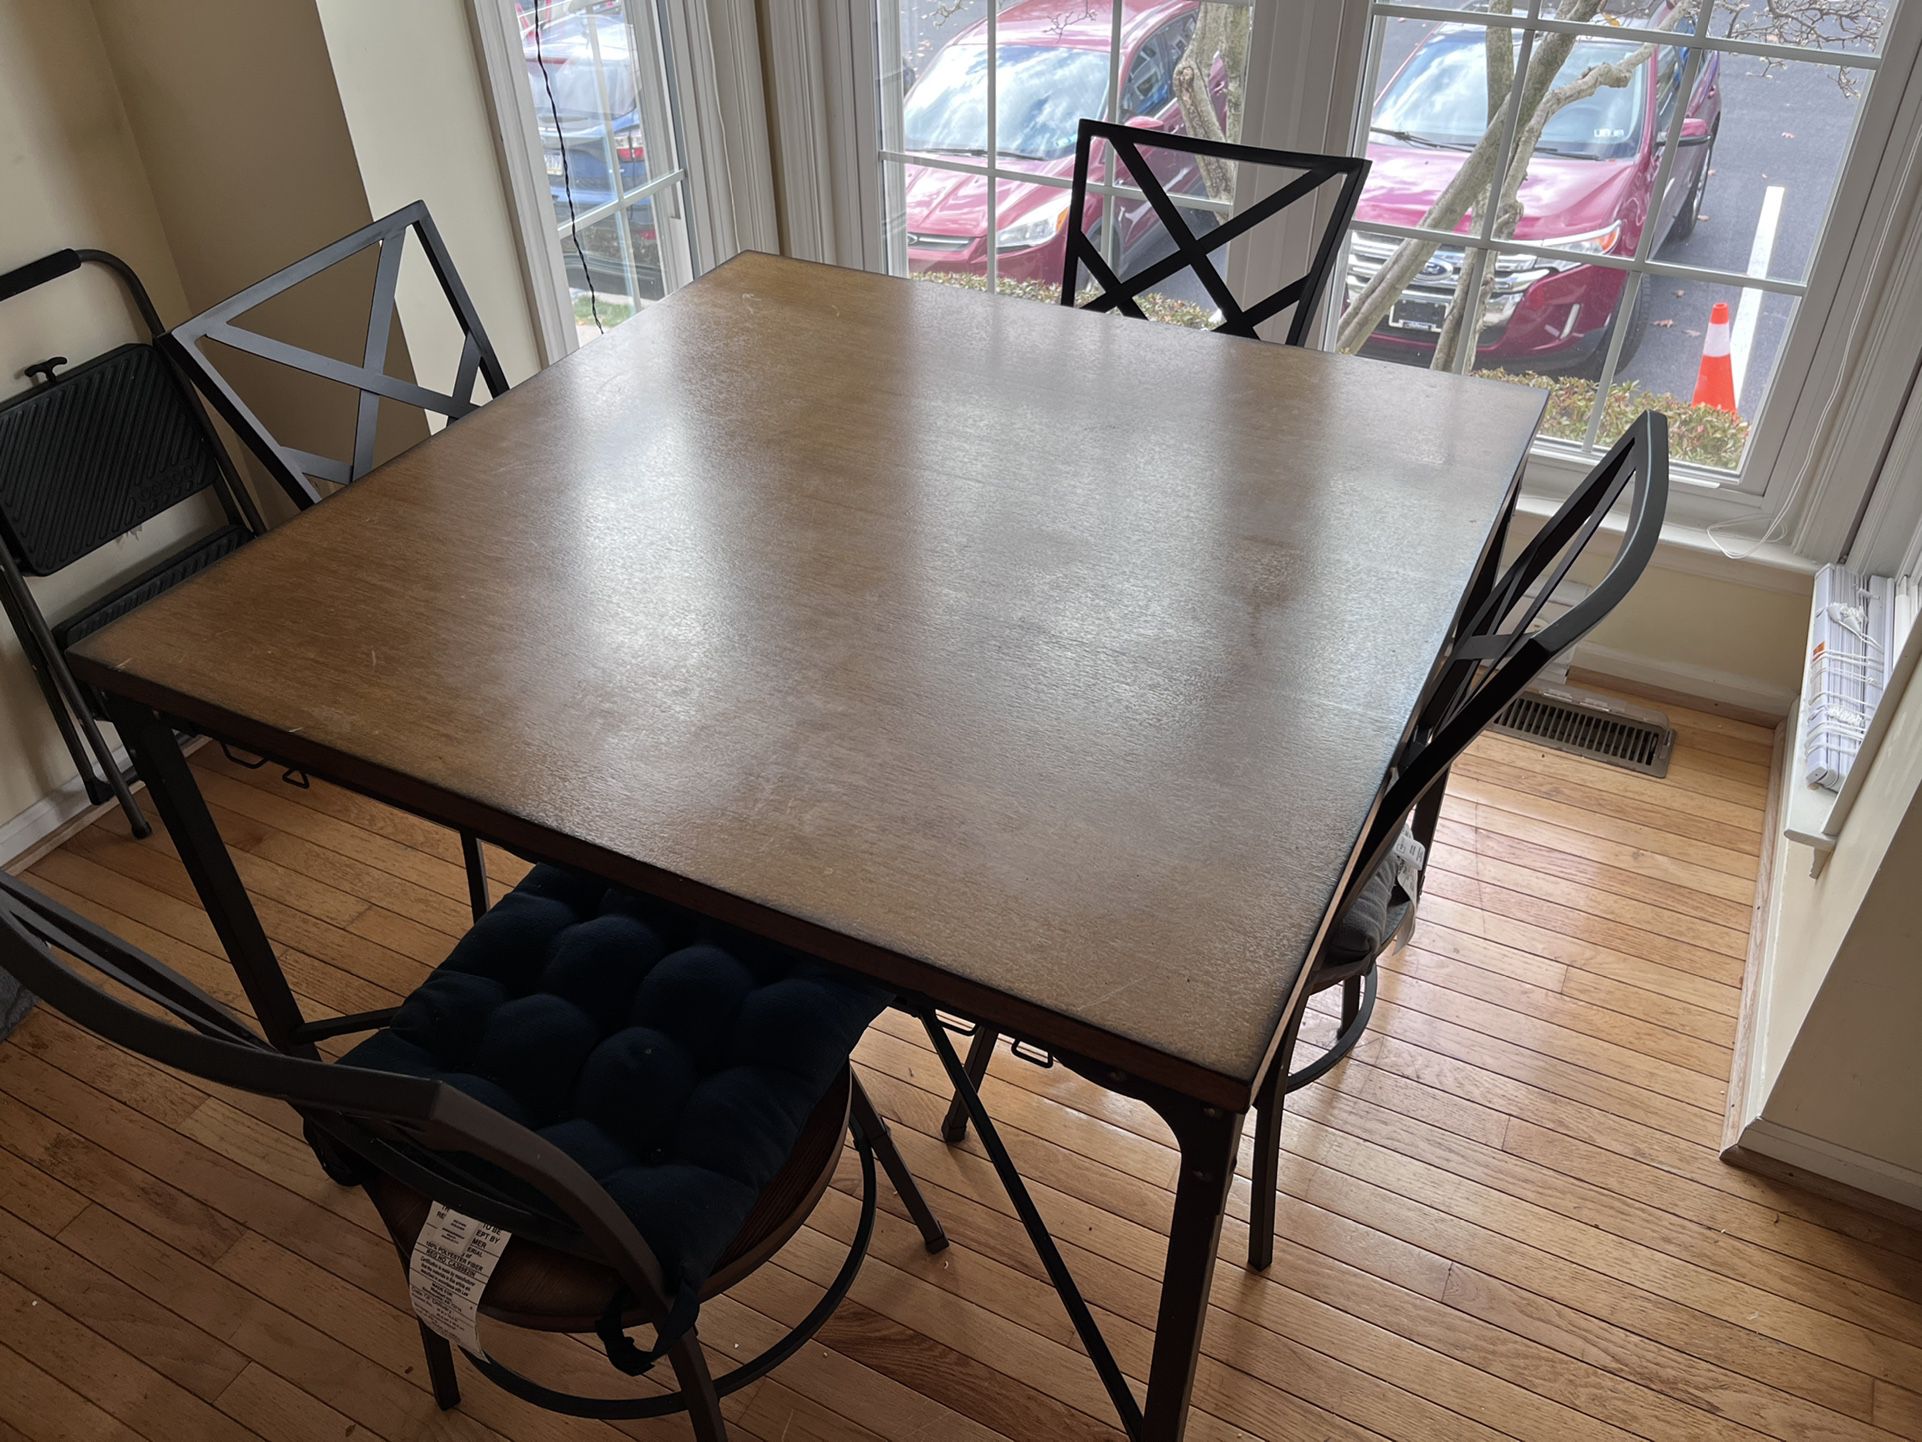 5-Piece Dining Set - Table Can Be Disassembled - Price Negotiable 